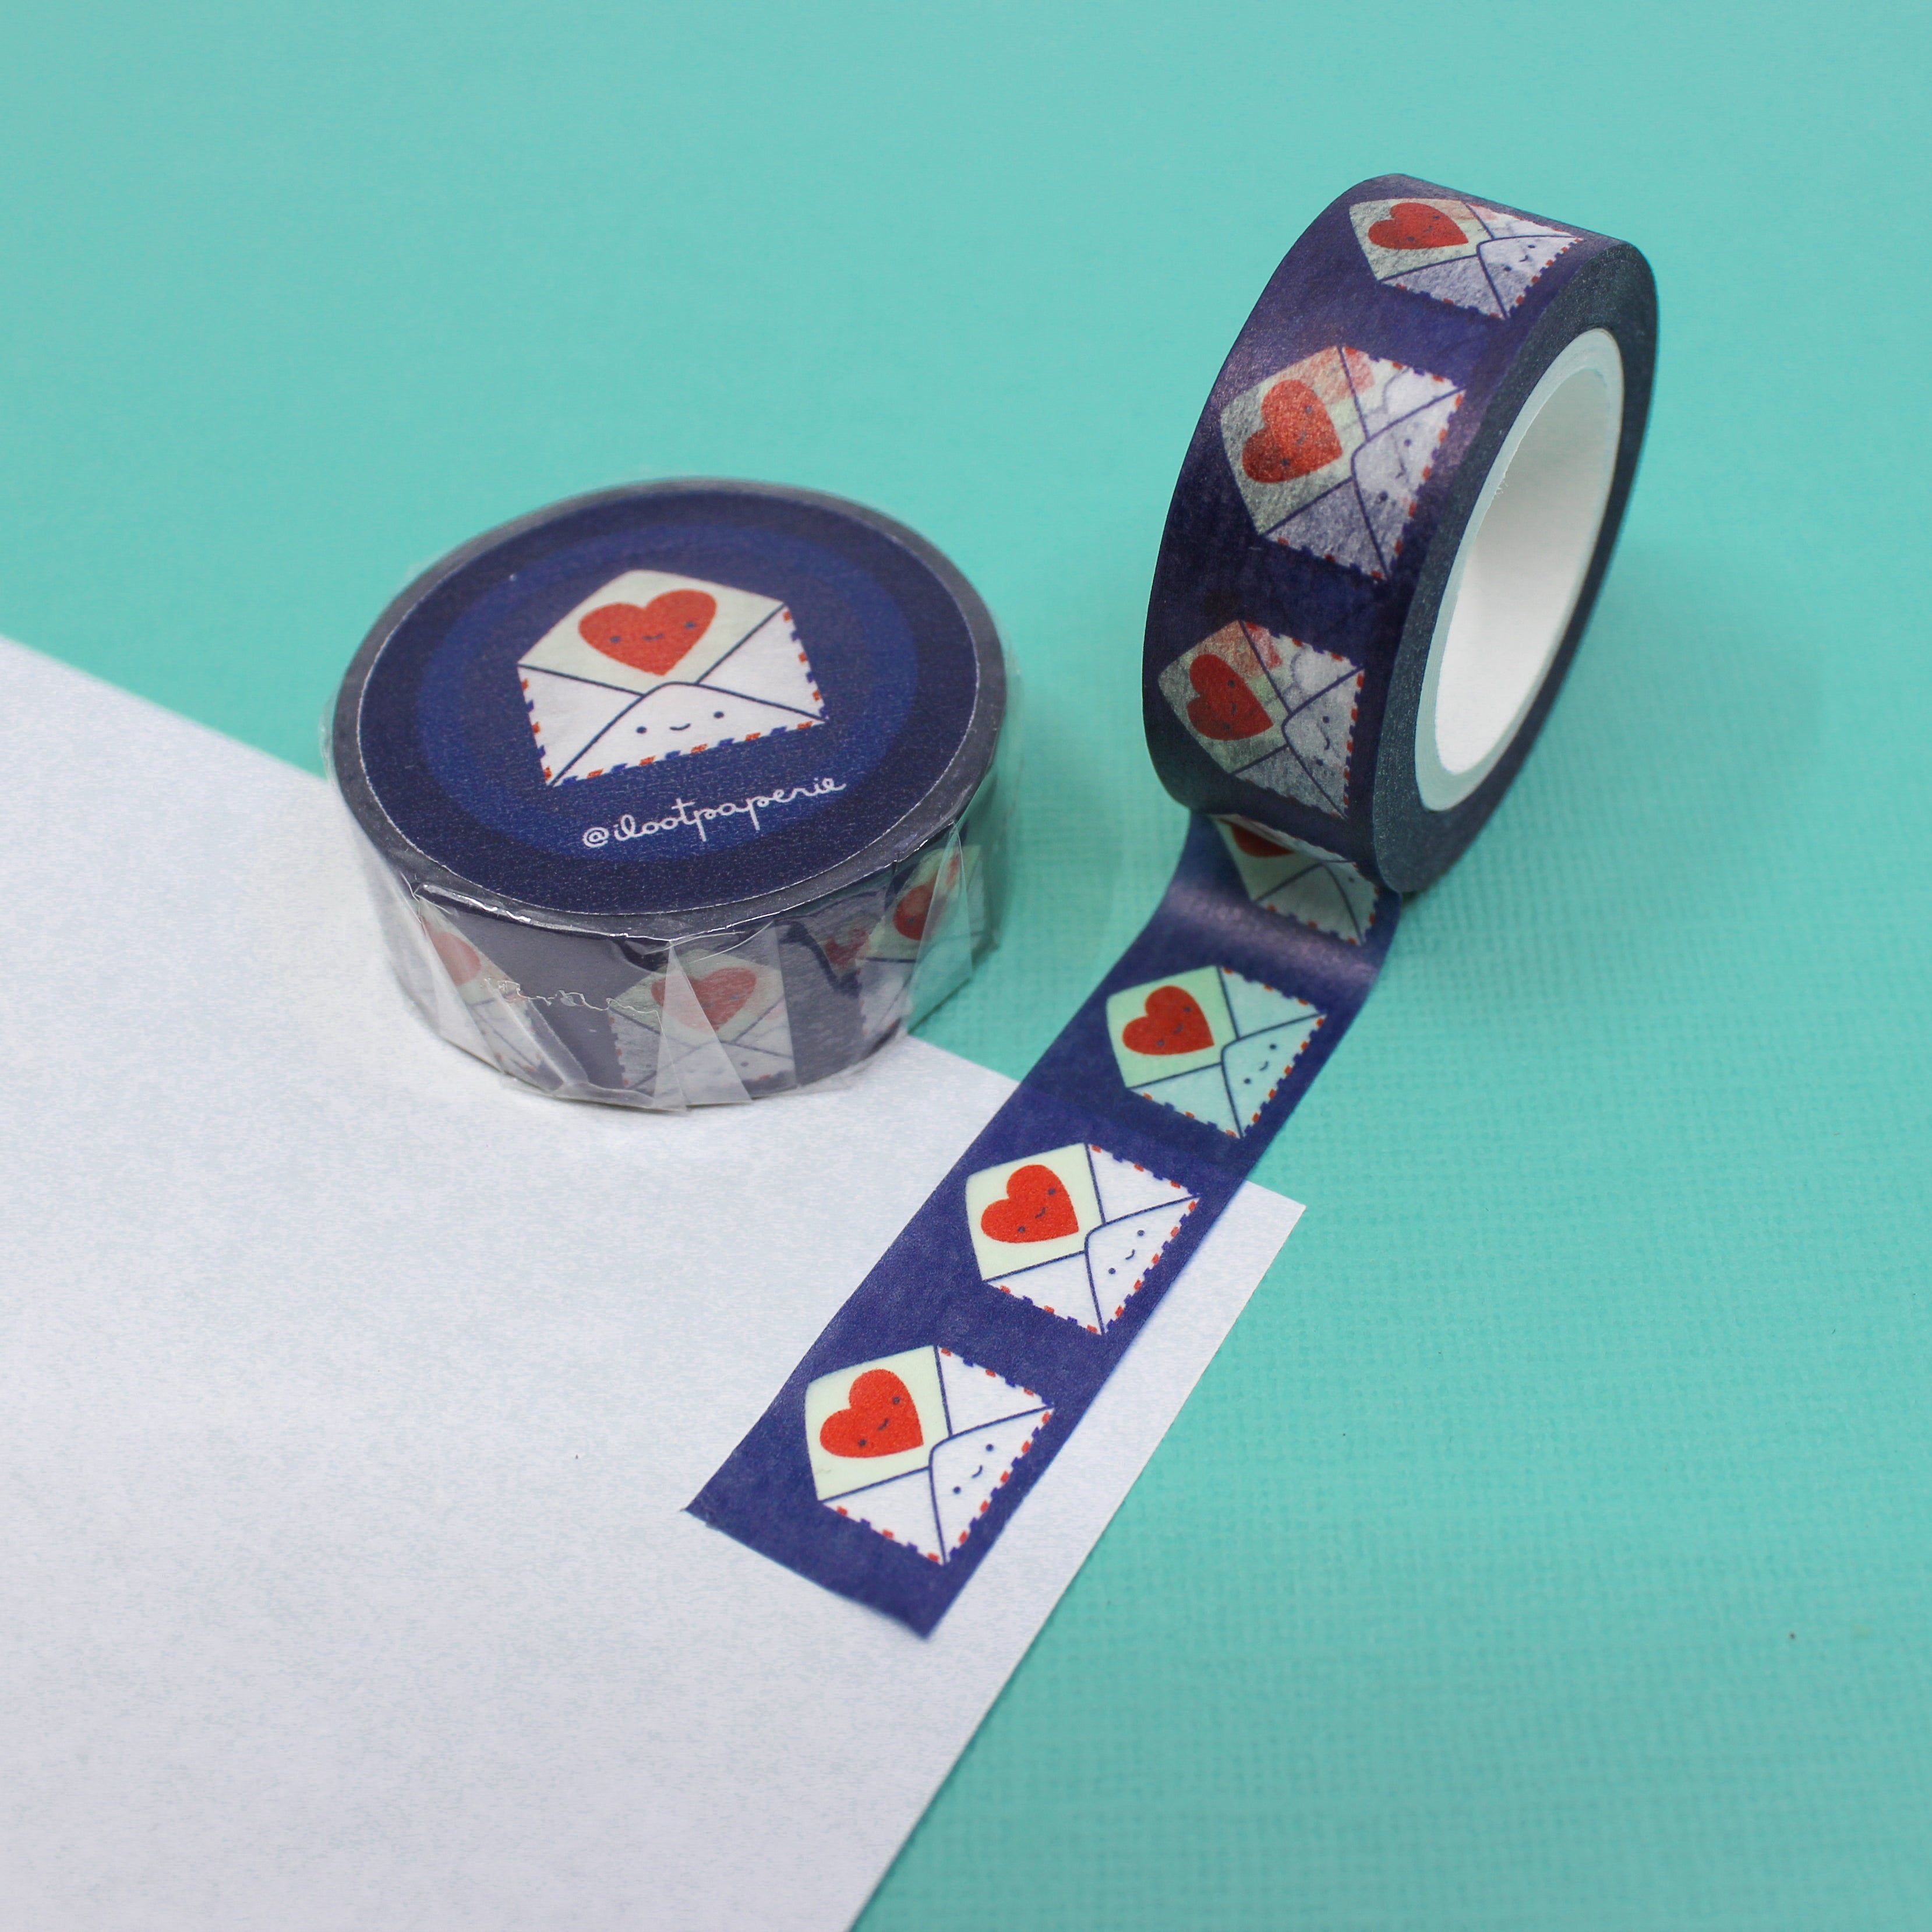 This is send love heart envelope snail mail collection washi tape from BBB Supplies Craft Shop